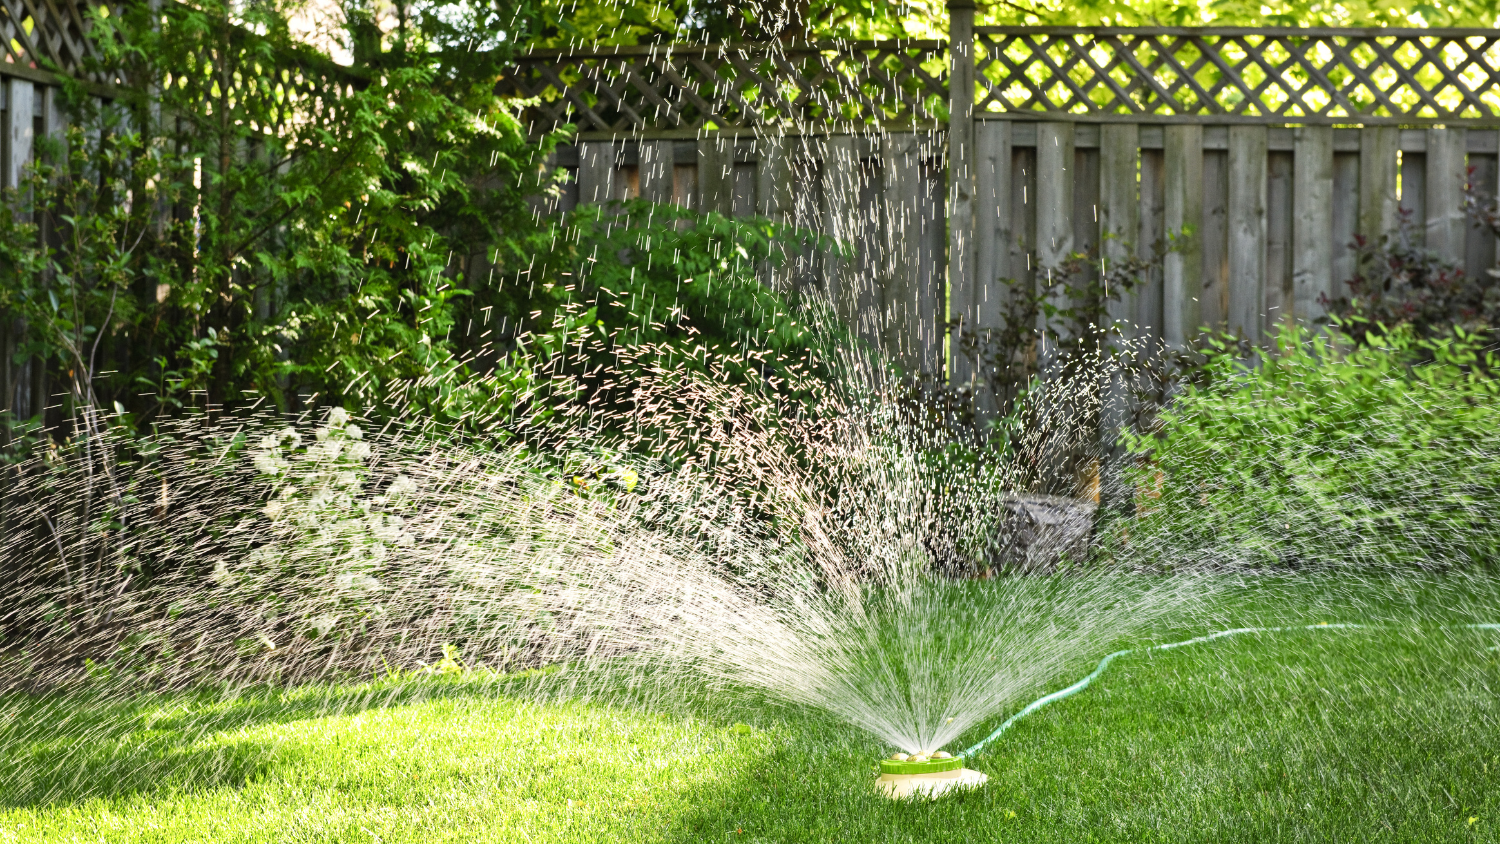 A photo of a sprinkler watering a green lawn.